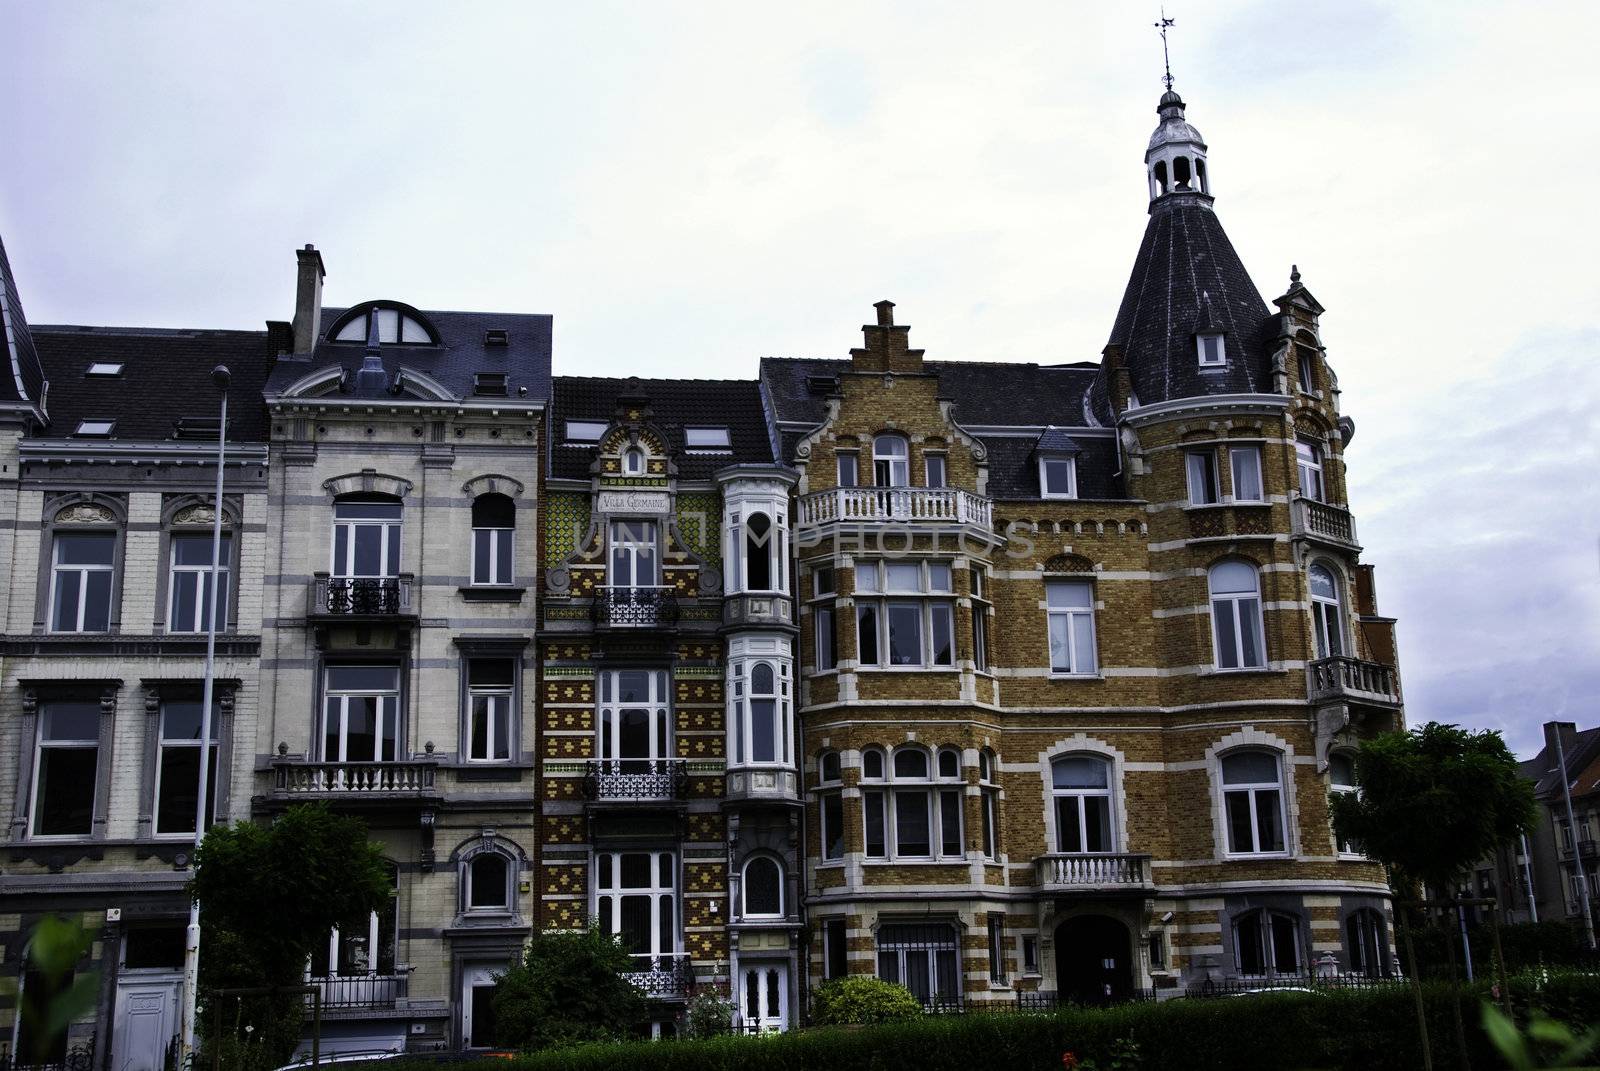 These are a few buildings on the beautiful Ambiorix Square in Brussels, Belgium. The area around the square is known for its stunning Art Nouveau buildings. 